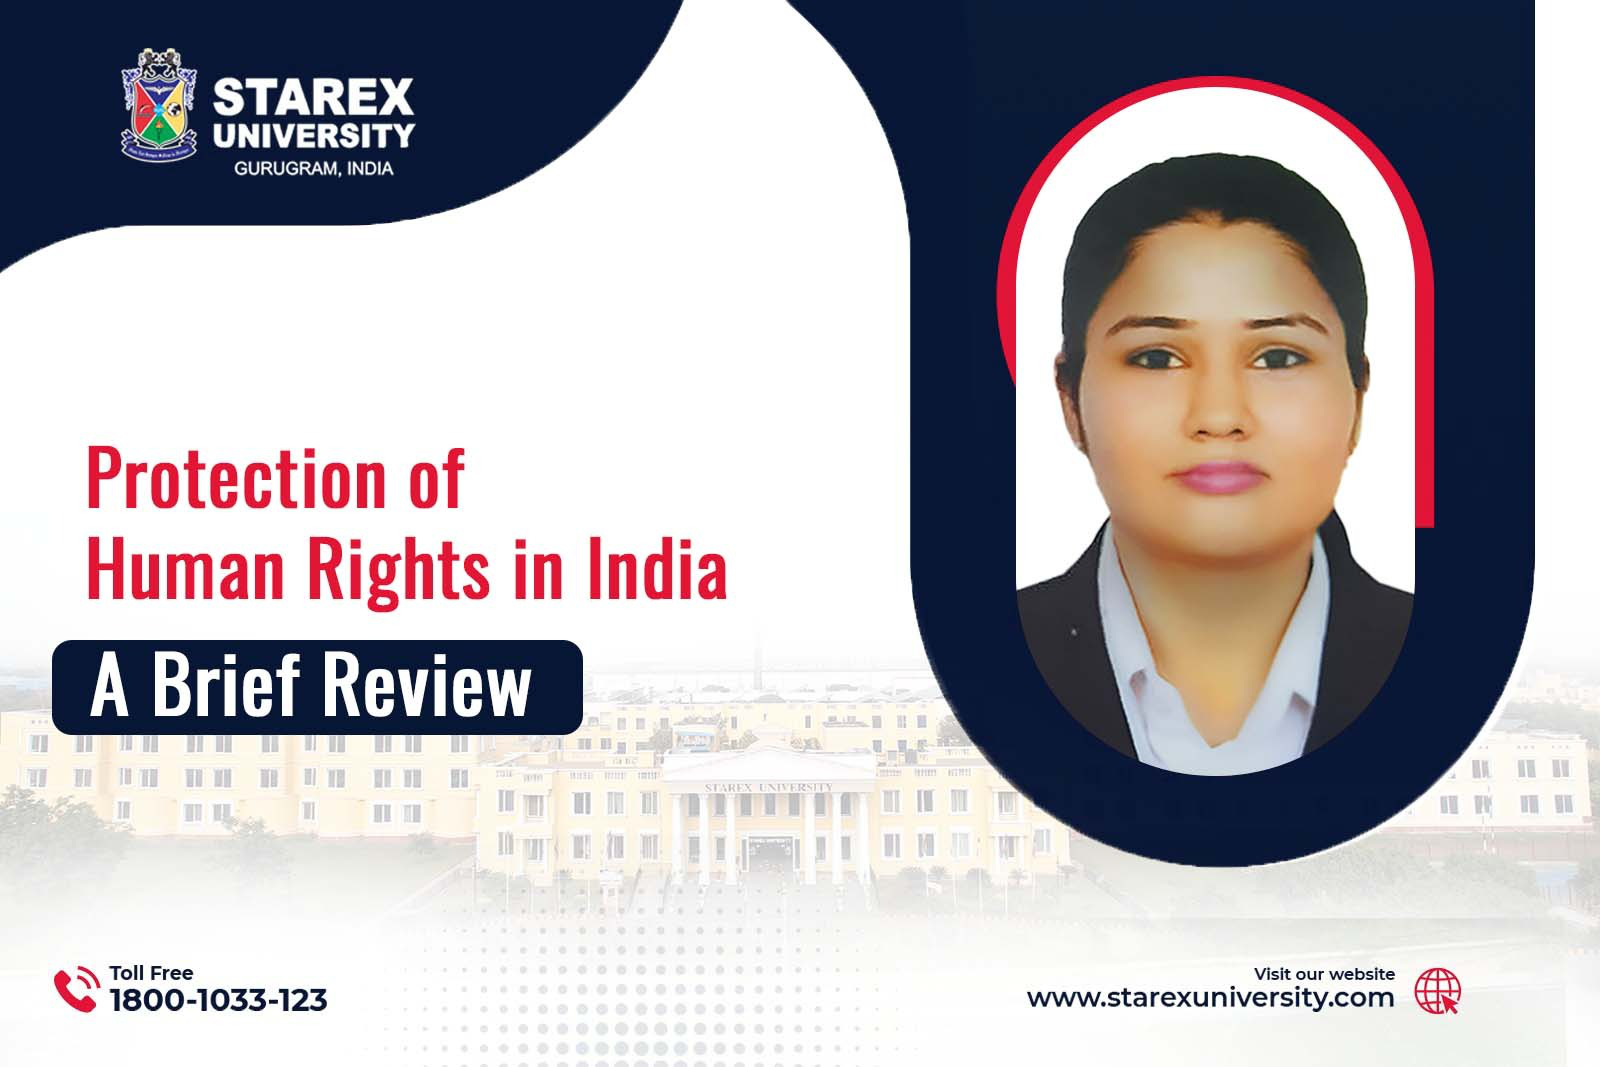 Protection of Human Rights in India - A Brief Review